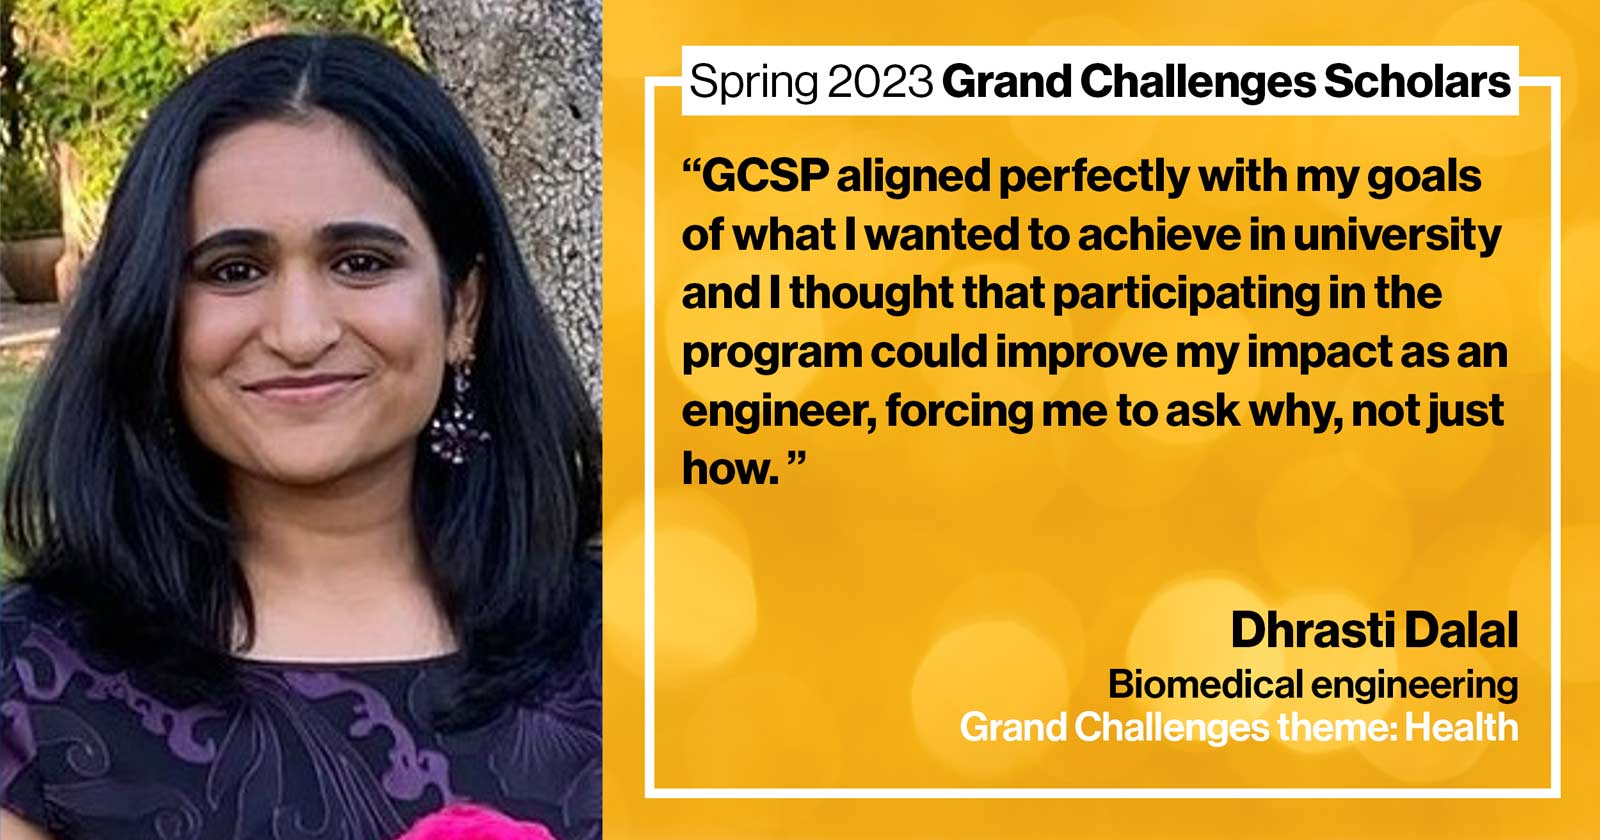 "Dhrasti Dalal Biomedical engineering Grand Challenge: Health Quote: “GCSP aligned perfectly with my goals of what I wanted to achieve in university and I thought that participating in the program could improve my impact as an engineer, forcing me to ask why, not just how.” "